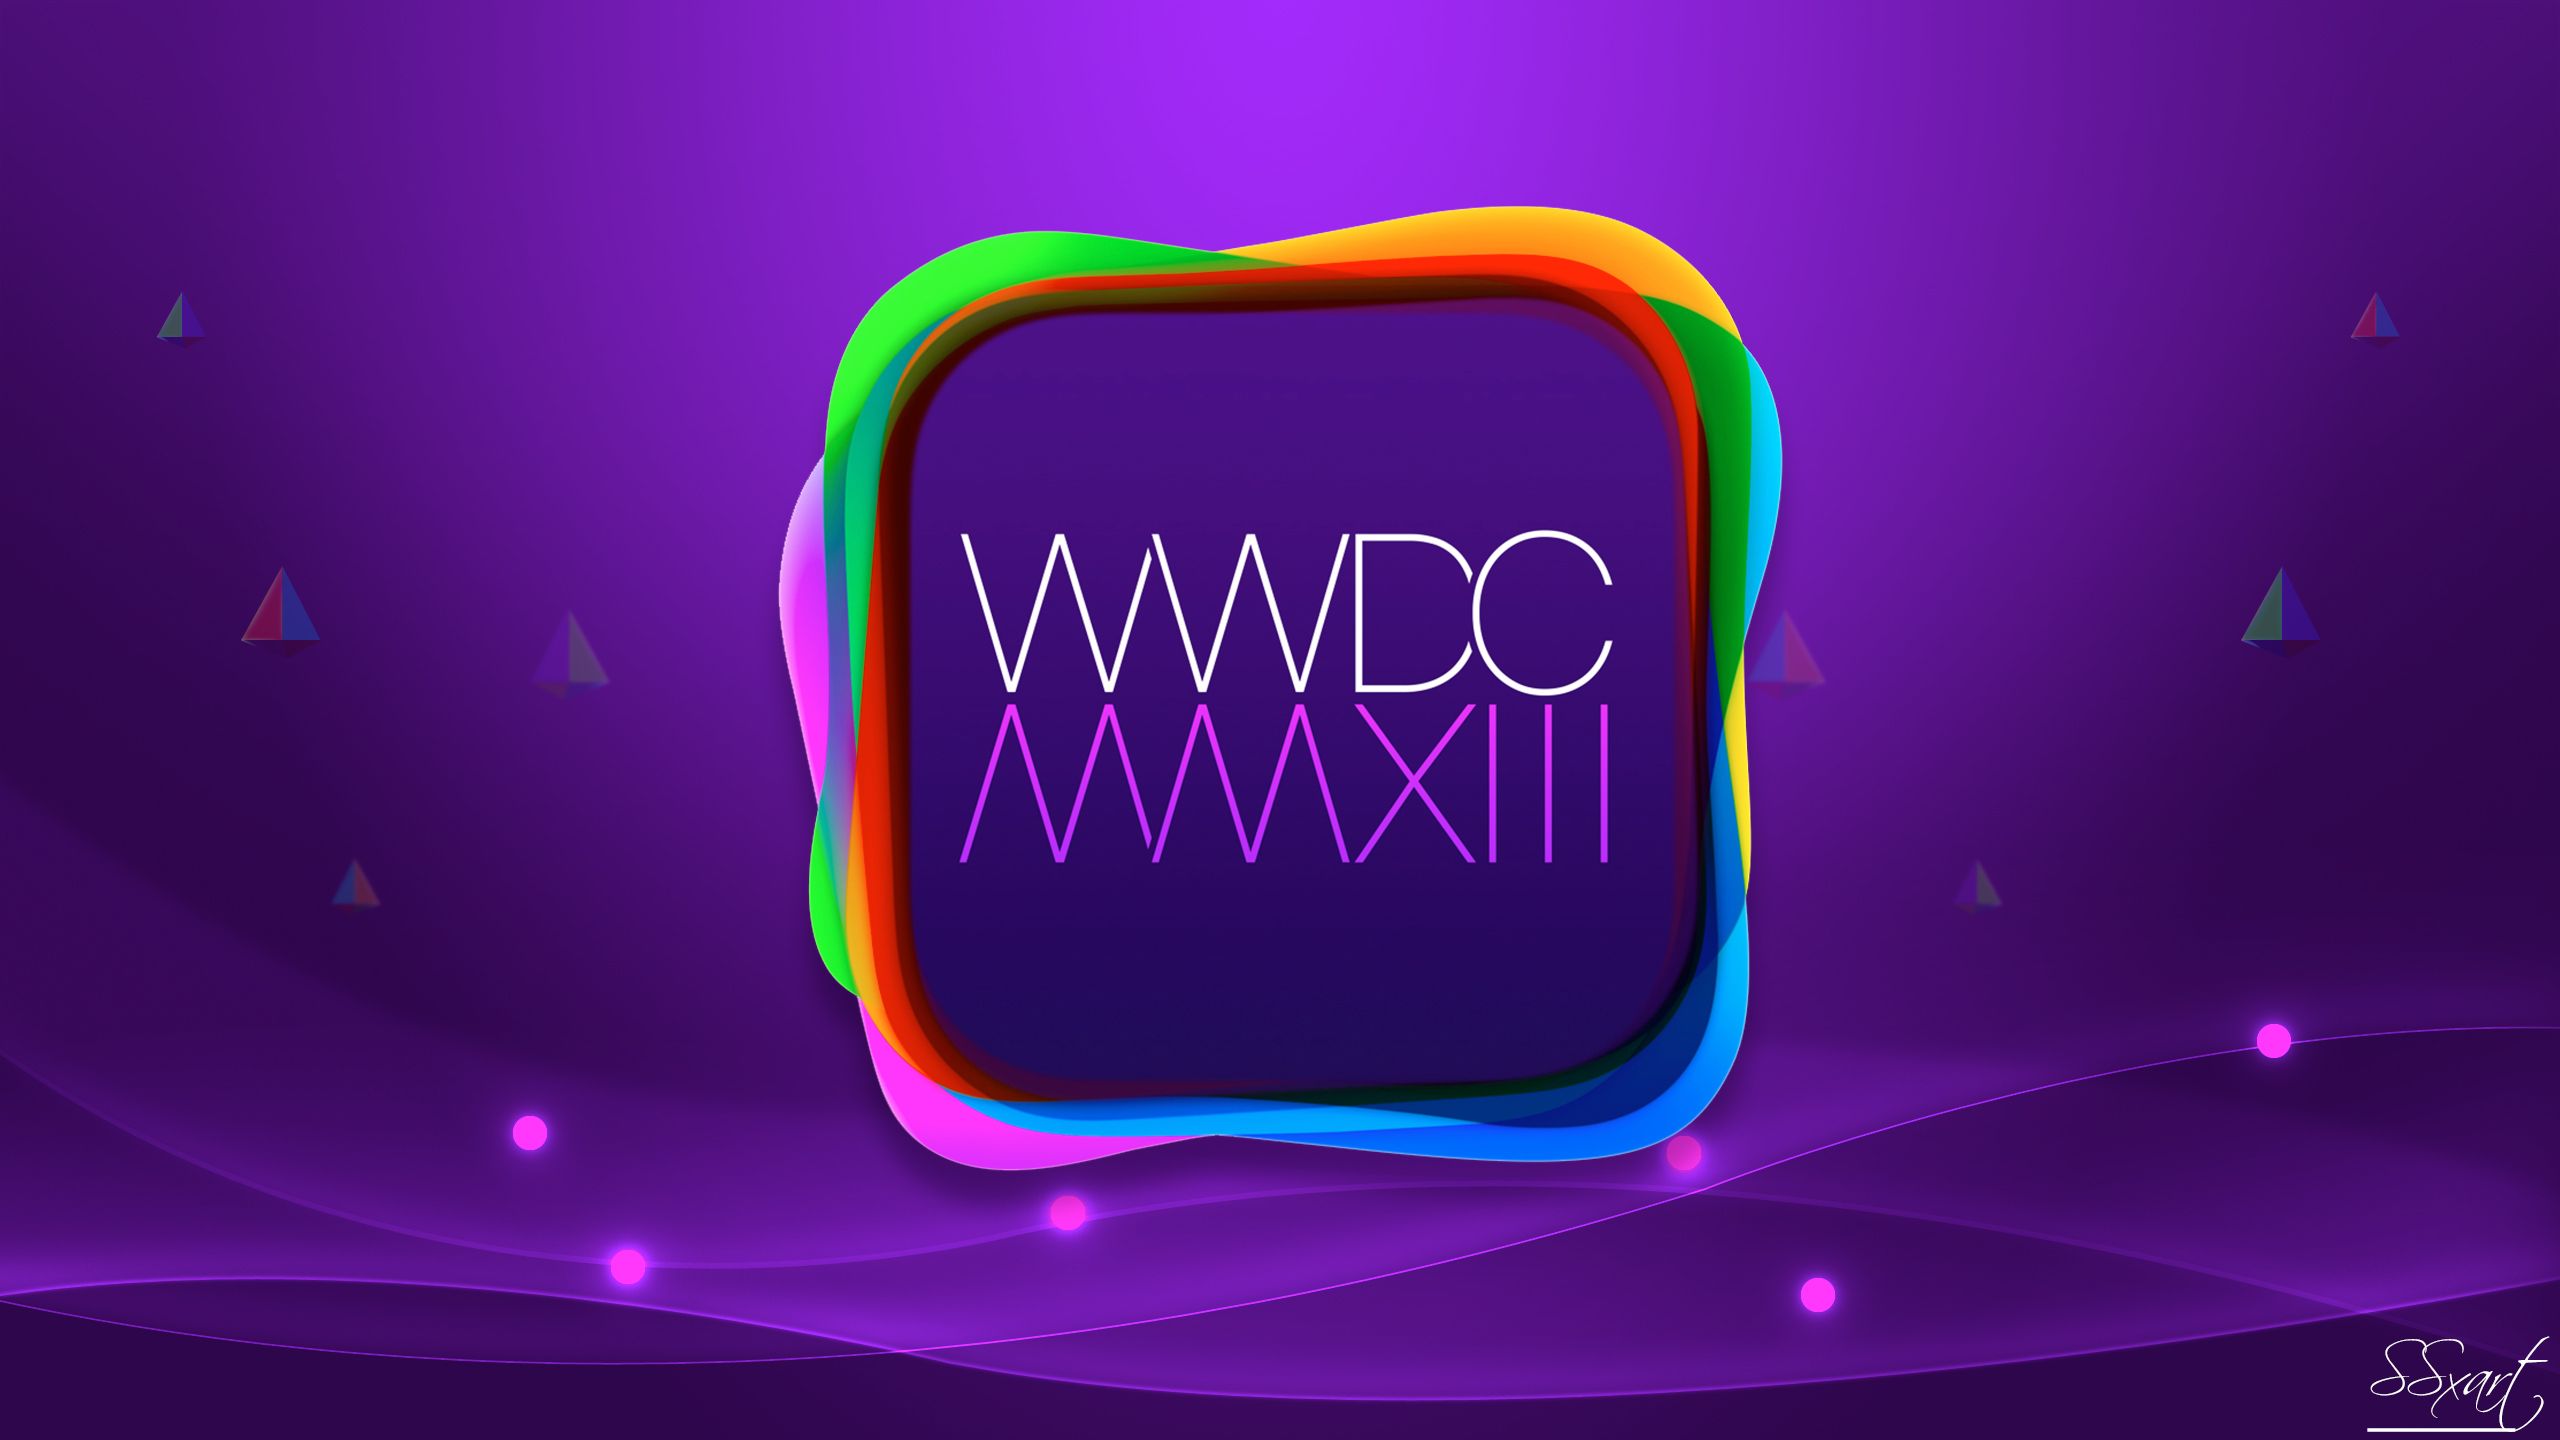 WWDC 2013 Apple event Wallpaper for iMac 27 inch by SSxArt